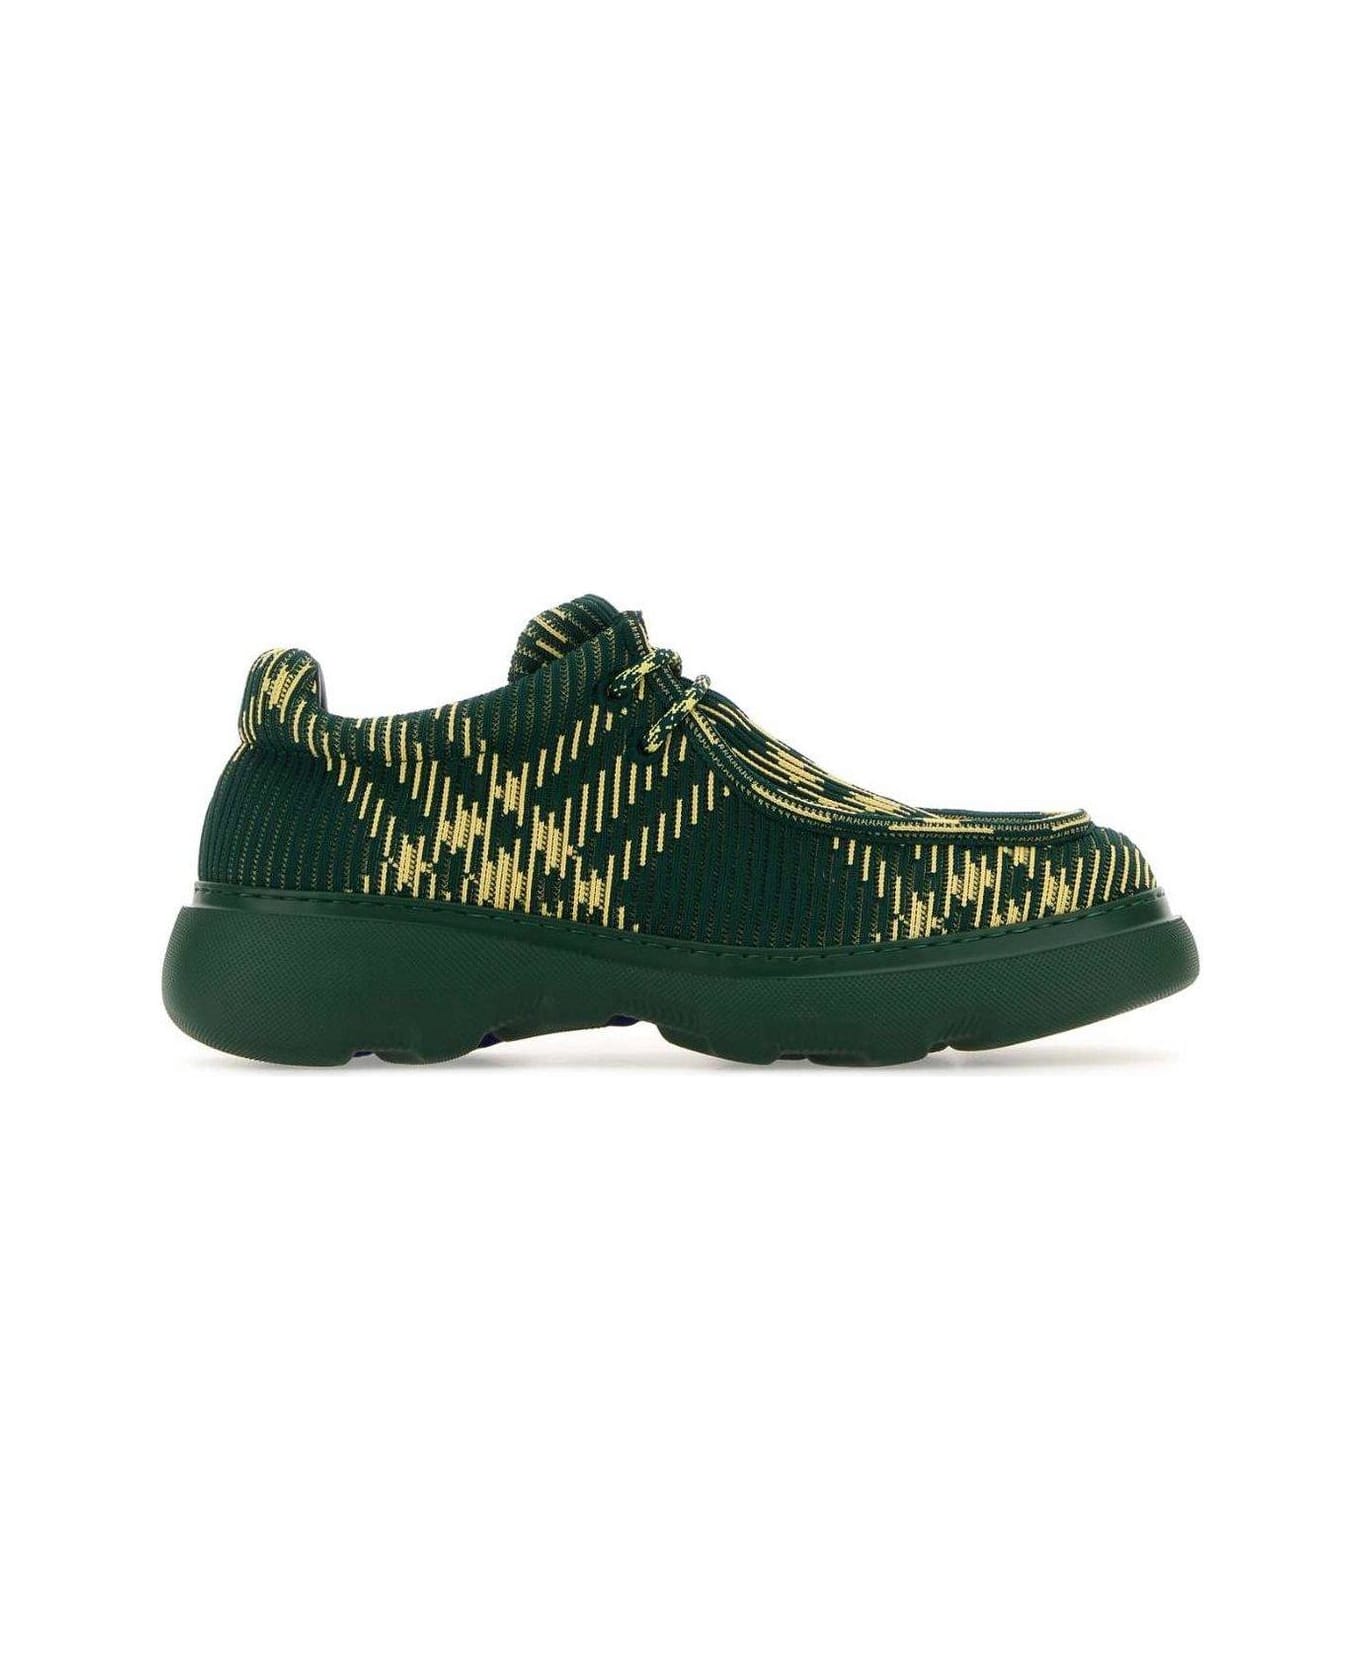 Burberry Ekd Check-printed Lace-up Derby Shoes - Primrose Ip Check スニーカー